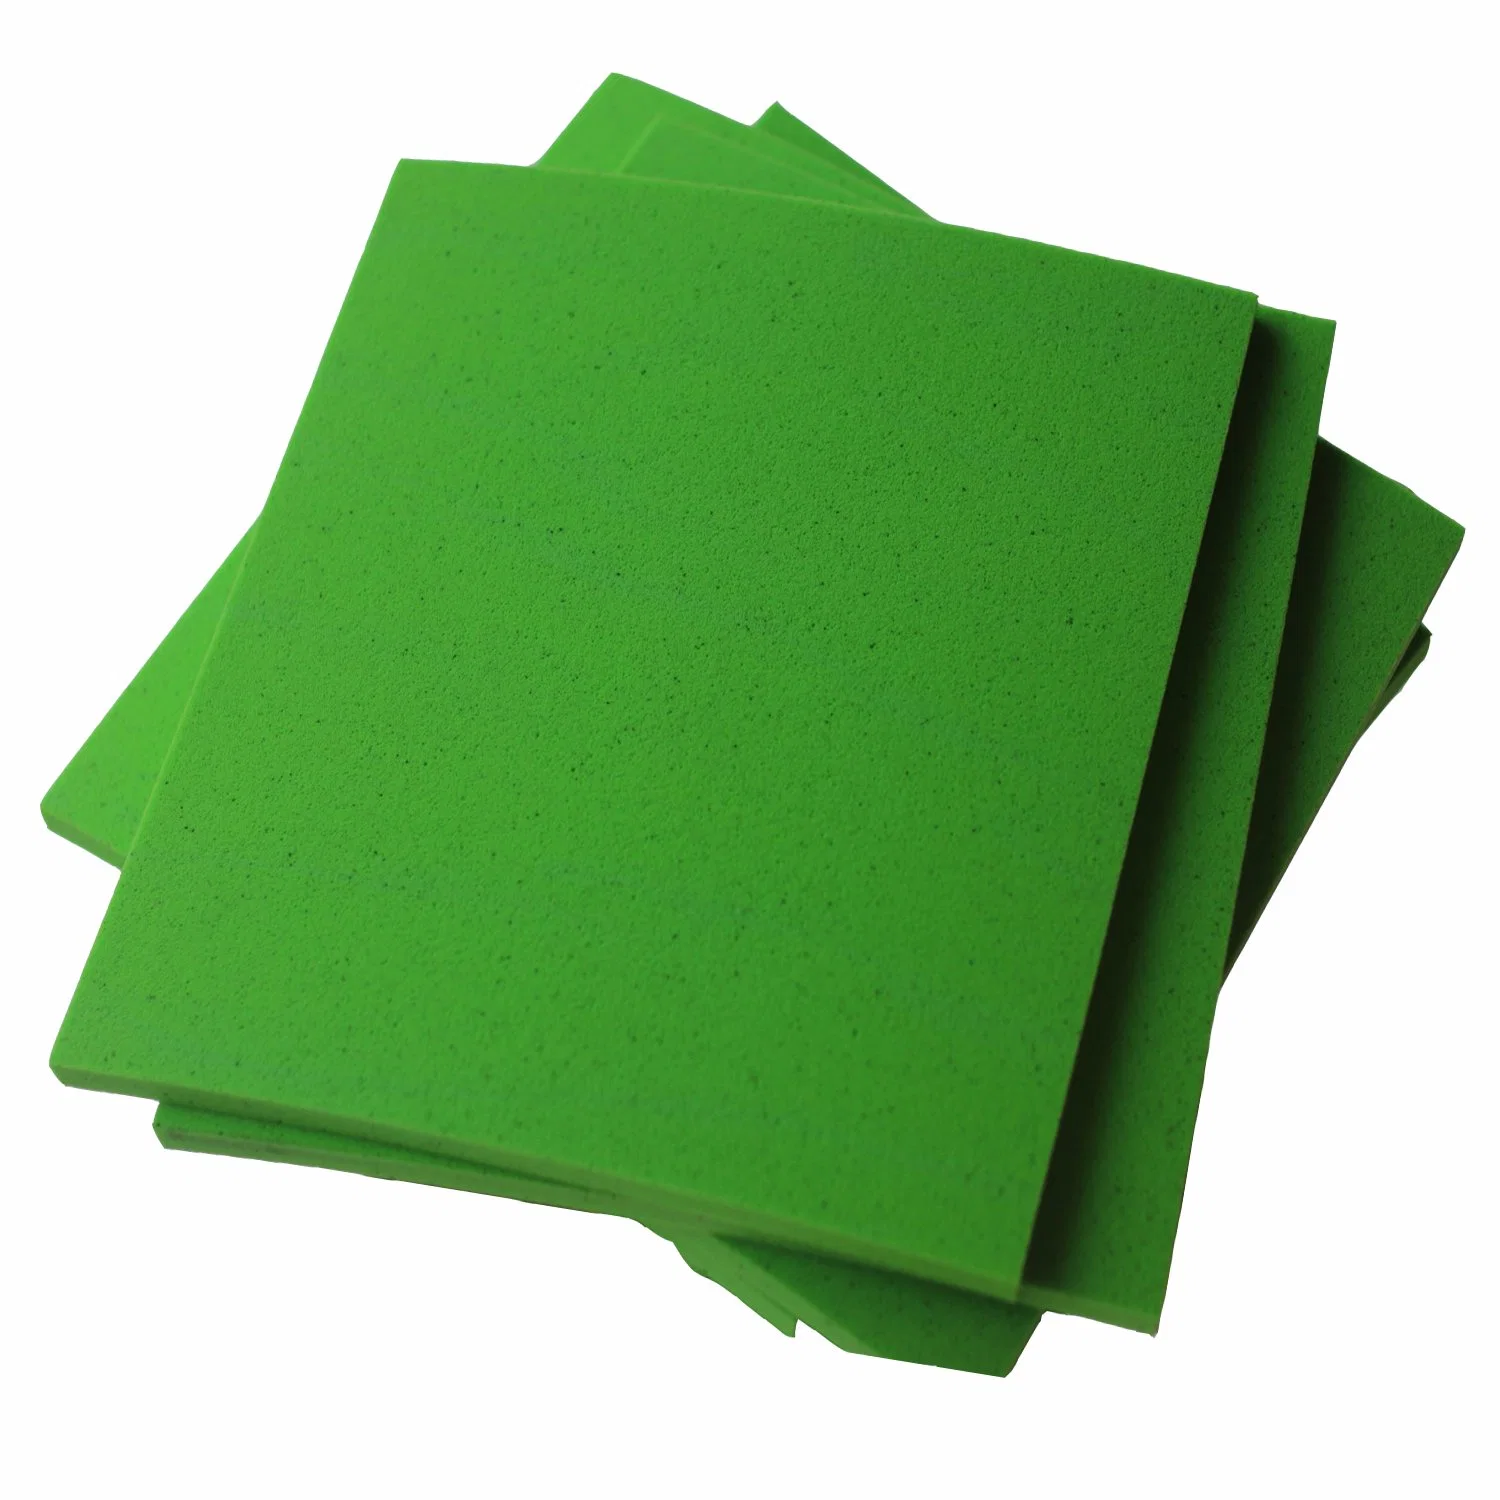 Green Ortholite Foam Insole Material